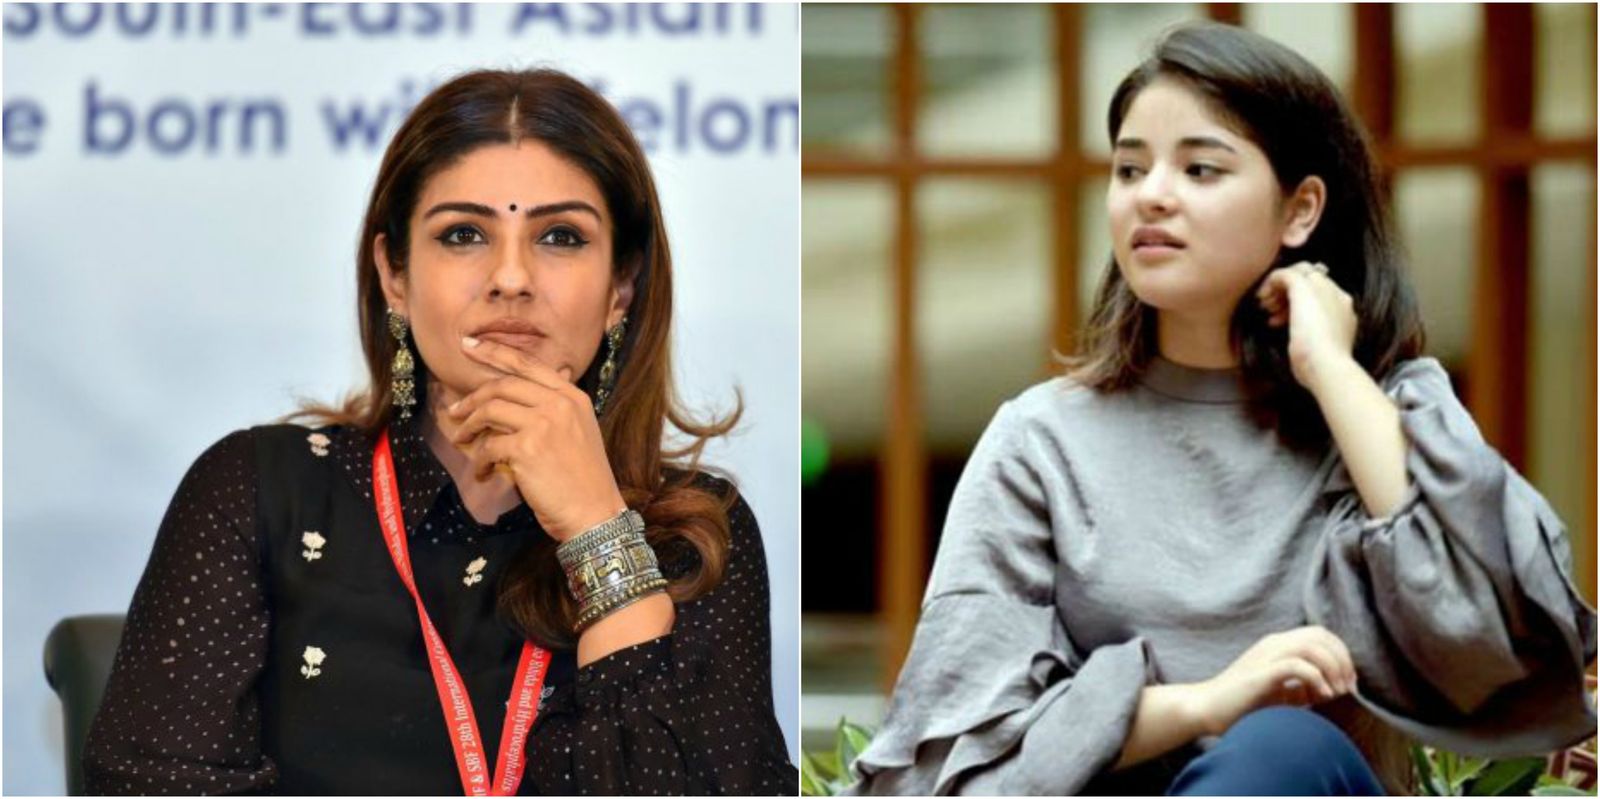 Raveena Tandon Reacts To Zaira Wasim's Exit From Bollywood, Asks Her To Not Demean It For Others